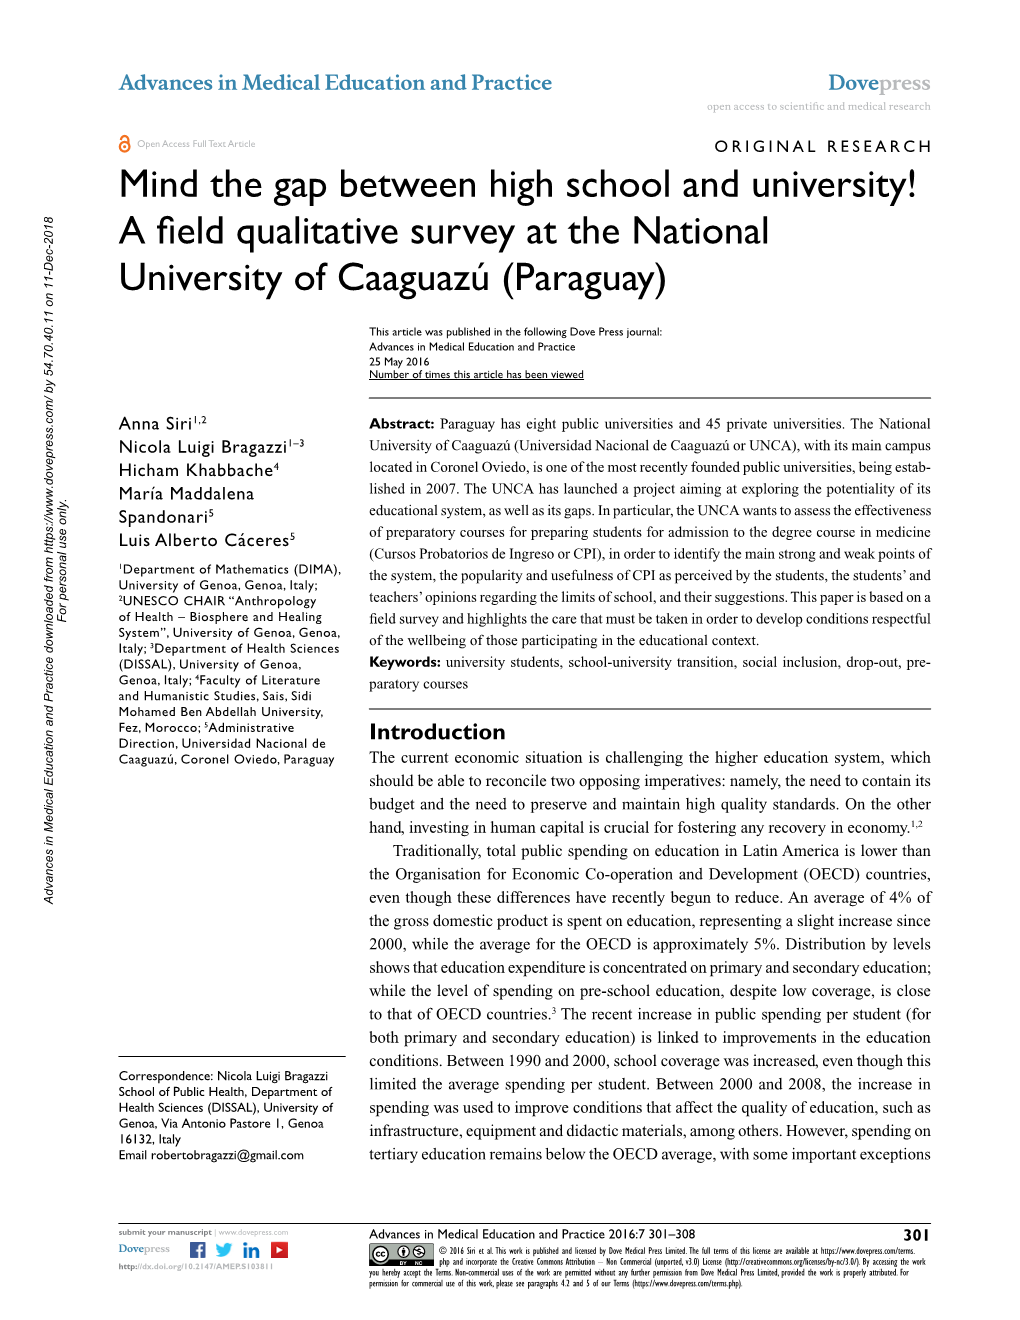 Mind the Gap Between High School and University! a Field Qualitative Survey at the National University of Caaguazú (Paraguay)